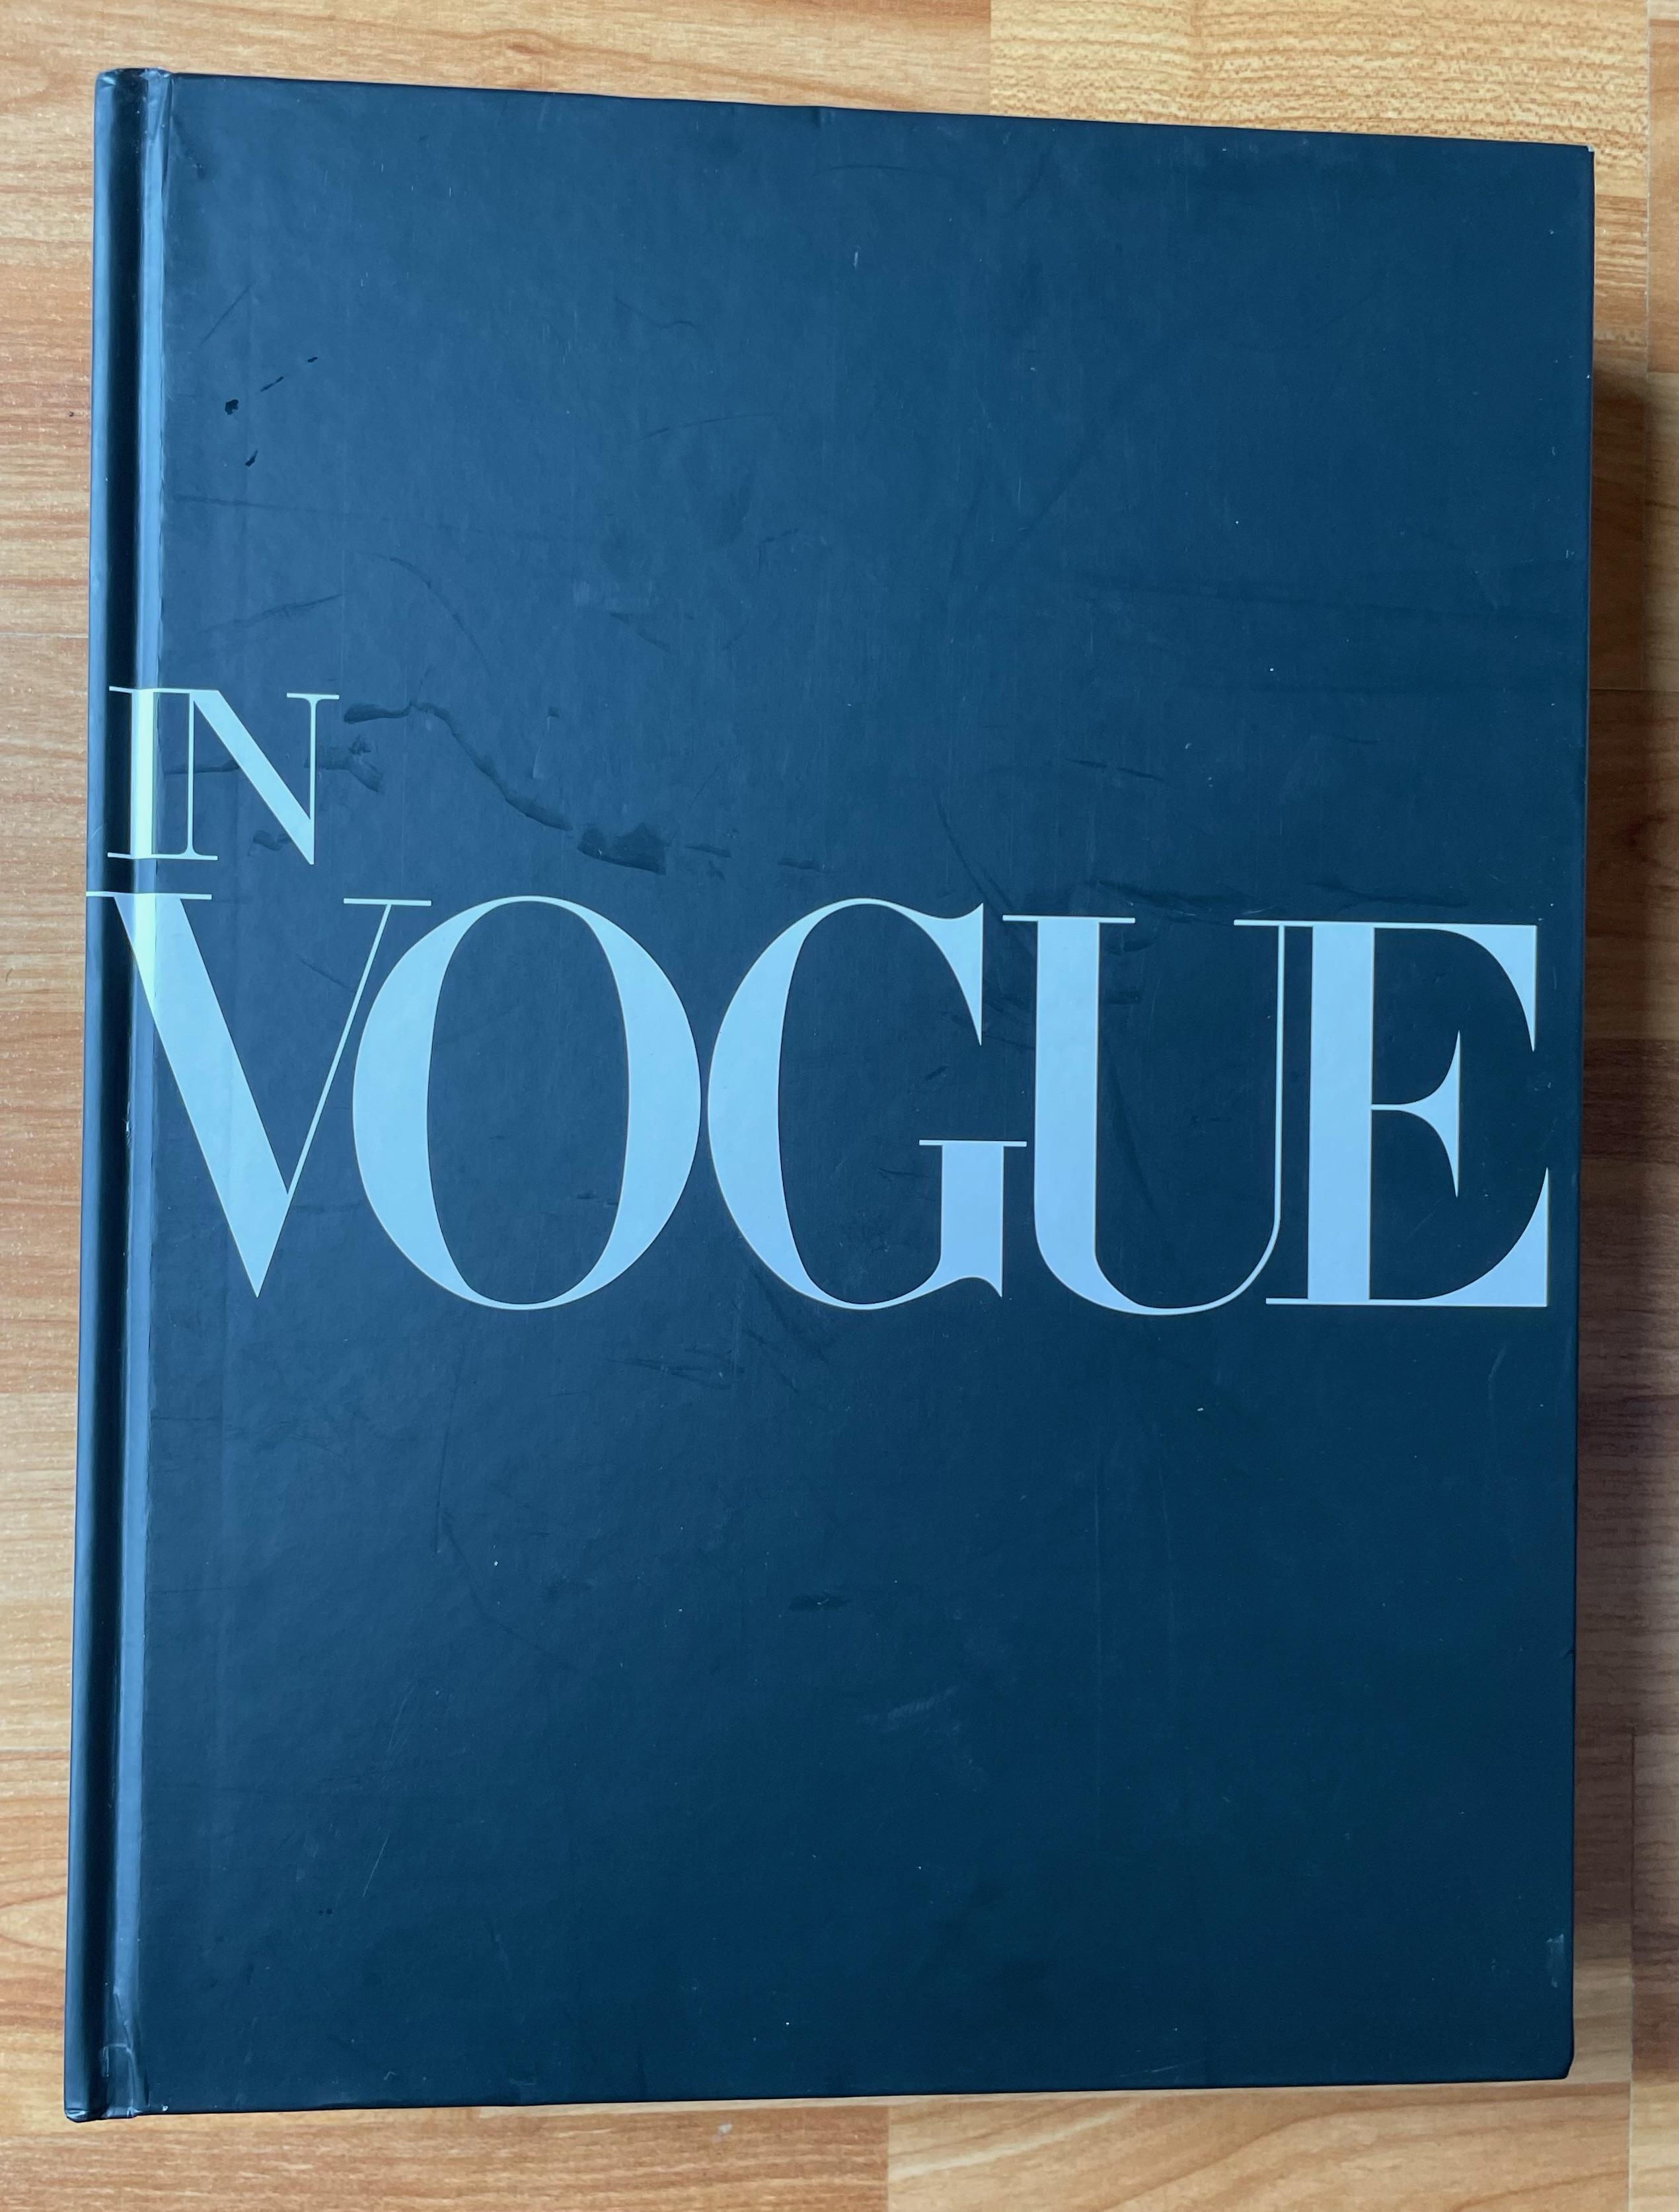 In Vogue. The Illustrated History of the World's Most Famous Fashion Magazine - Angeletti, Norberto; Alberto Oliva